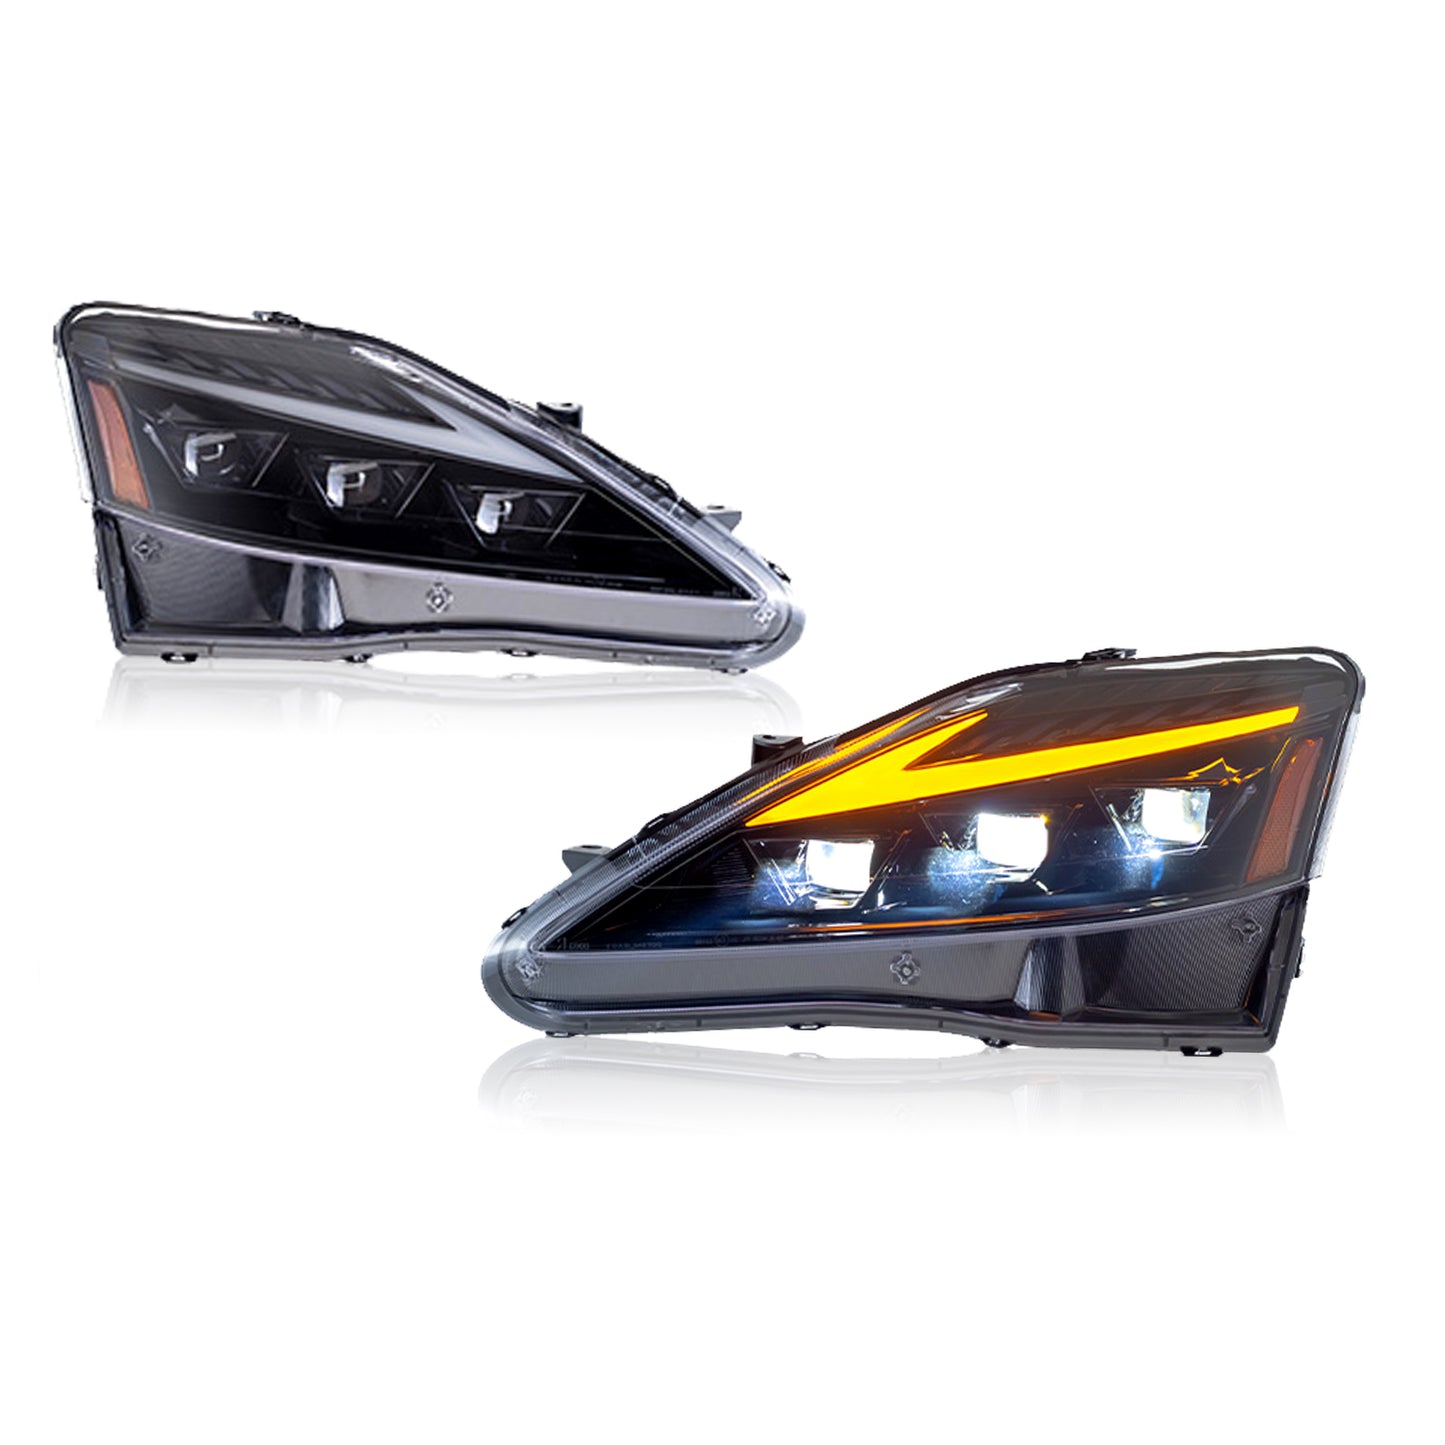 HCMOTION LED Head Light For Lexus IS250 IS350 C ISF 2006-2013